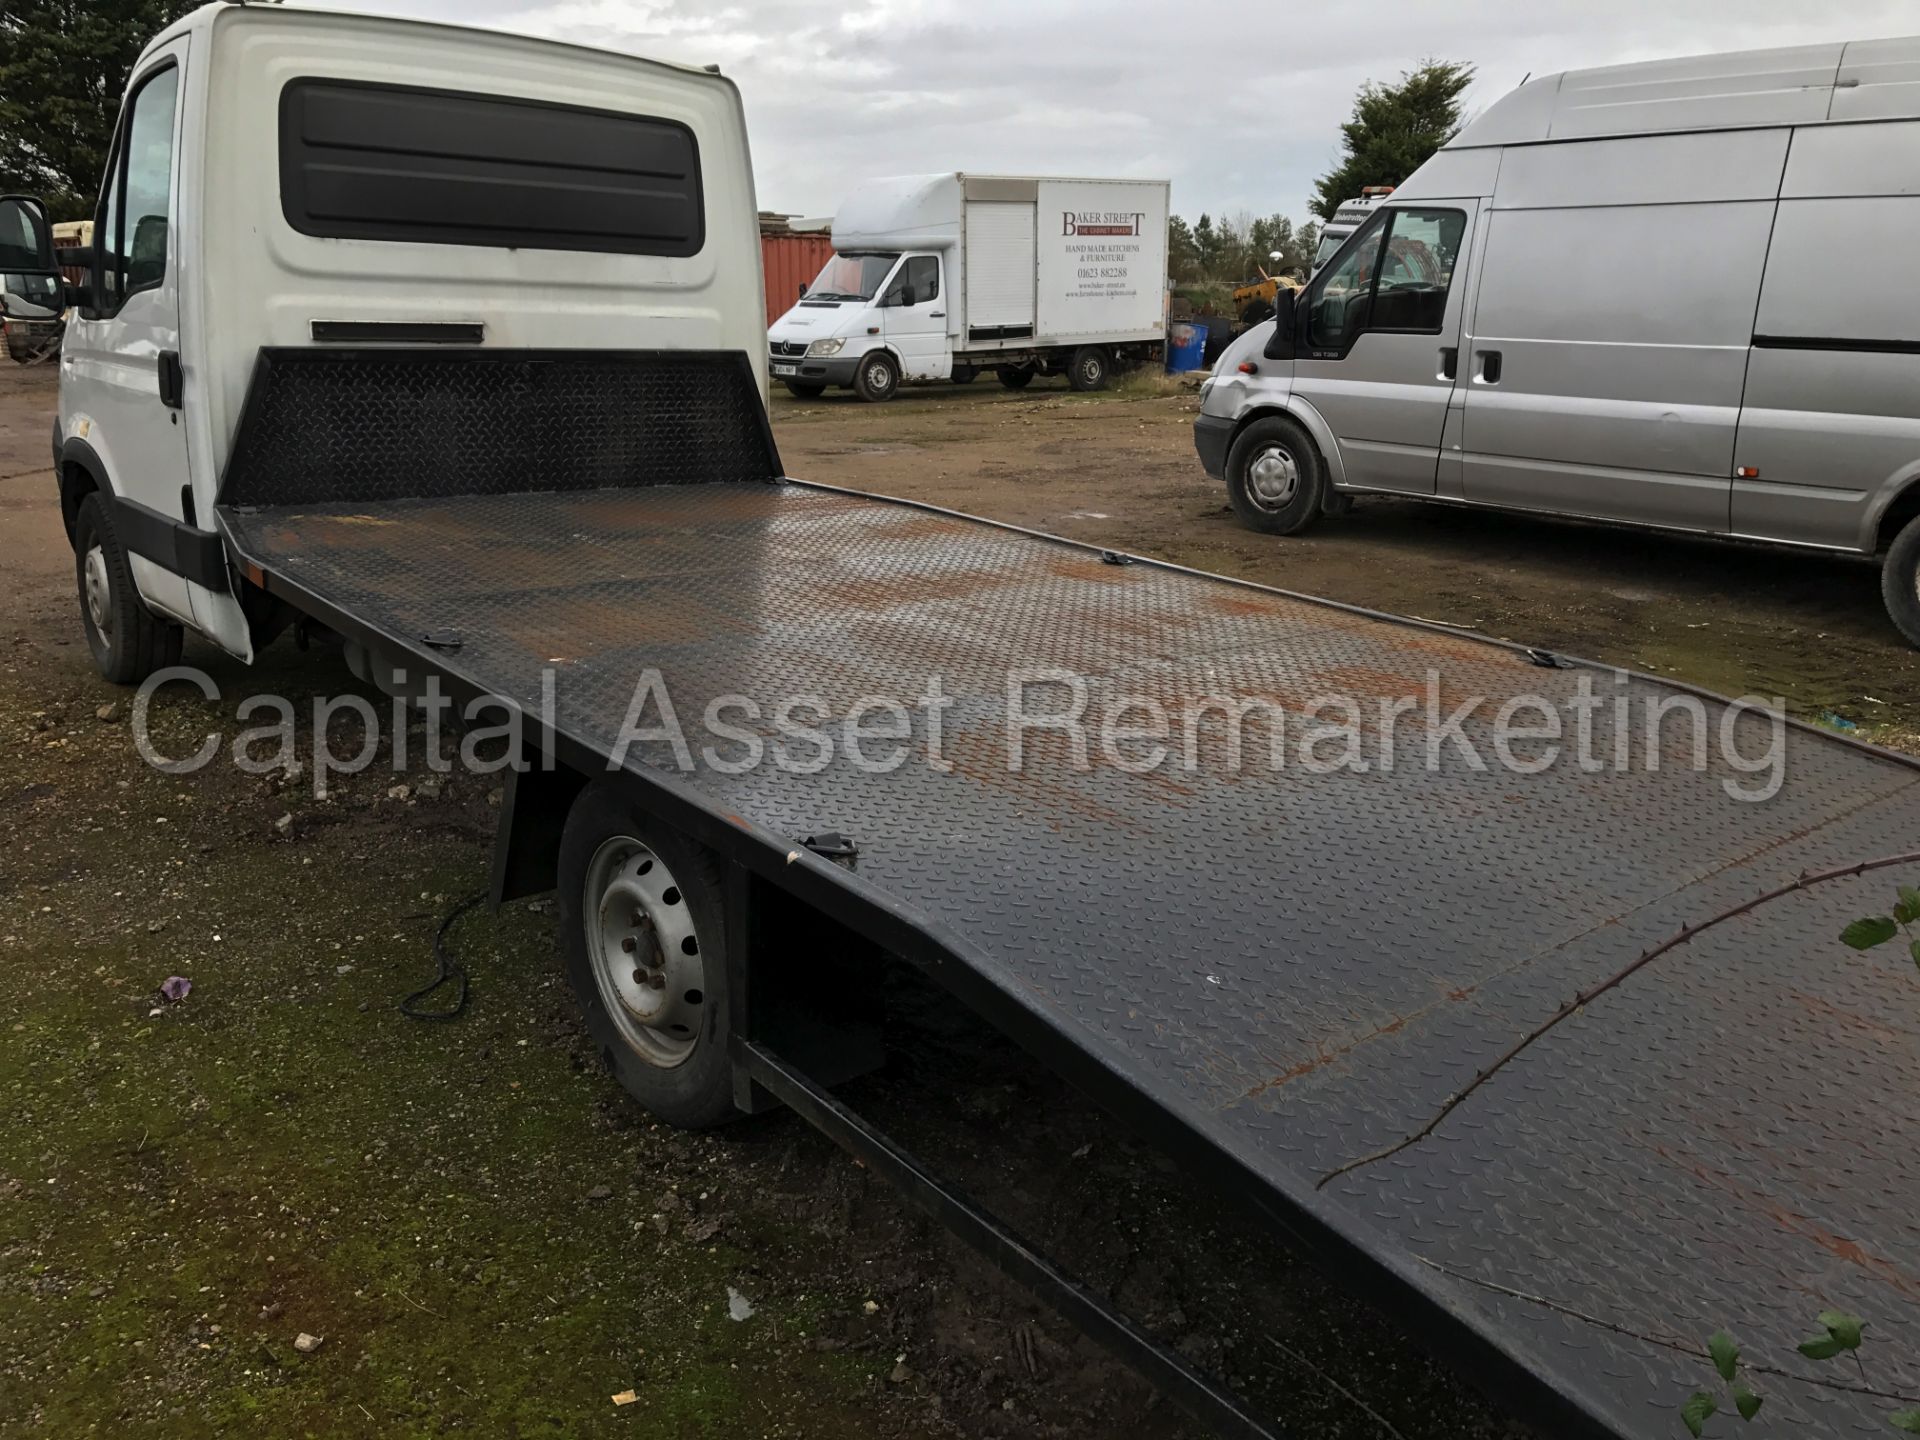 (On Sale) IVECO DAILY 35S11 '16 FT RECOVERY TRUCK' (2012 MODEL) *BRAND NEW BODY* (1 OWNER FROM NEW) - Image 5 of 10